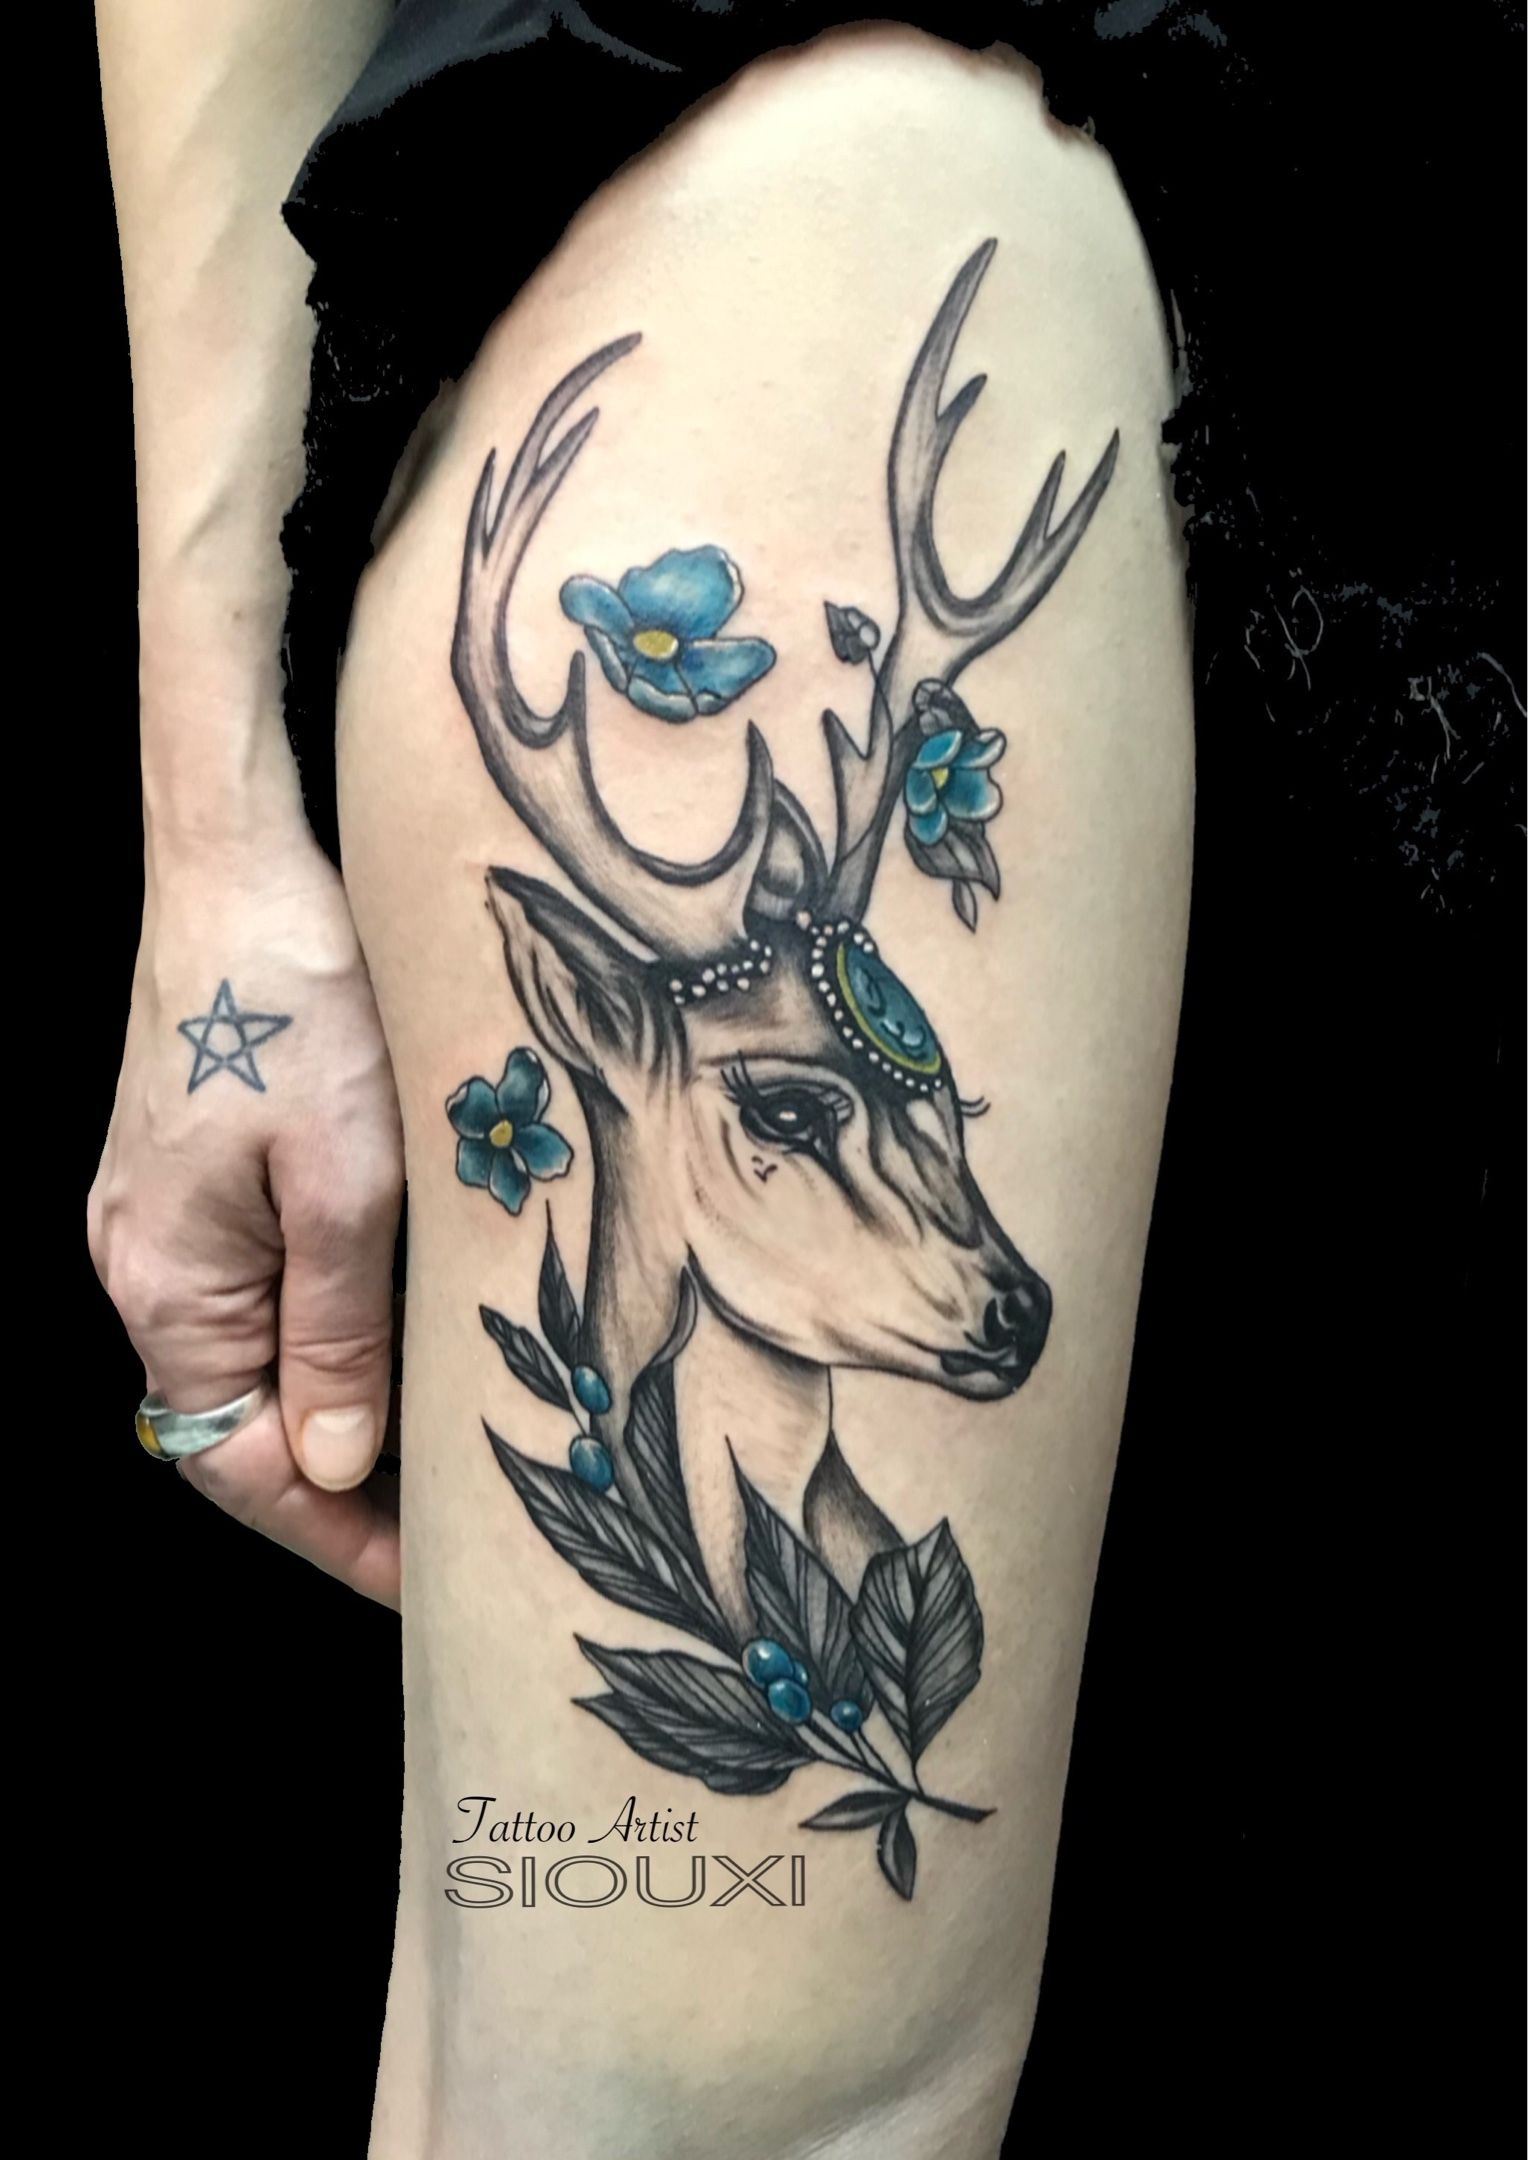 79 Majestic Deer Tattoos With Meaning - Our Mindful Life